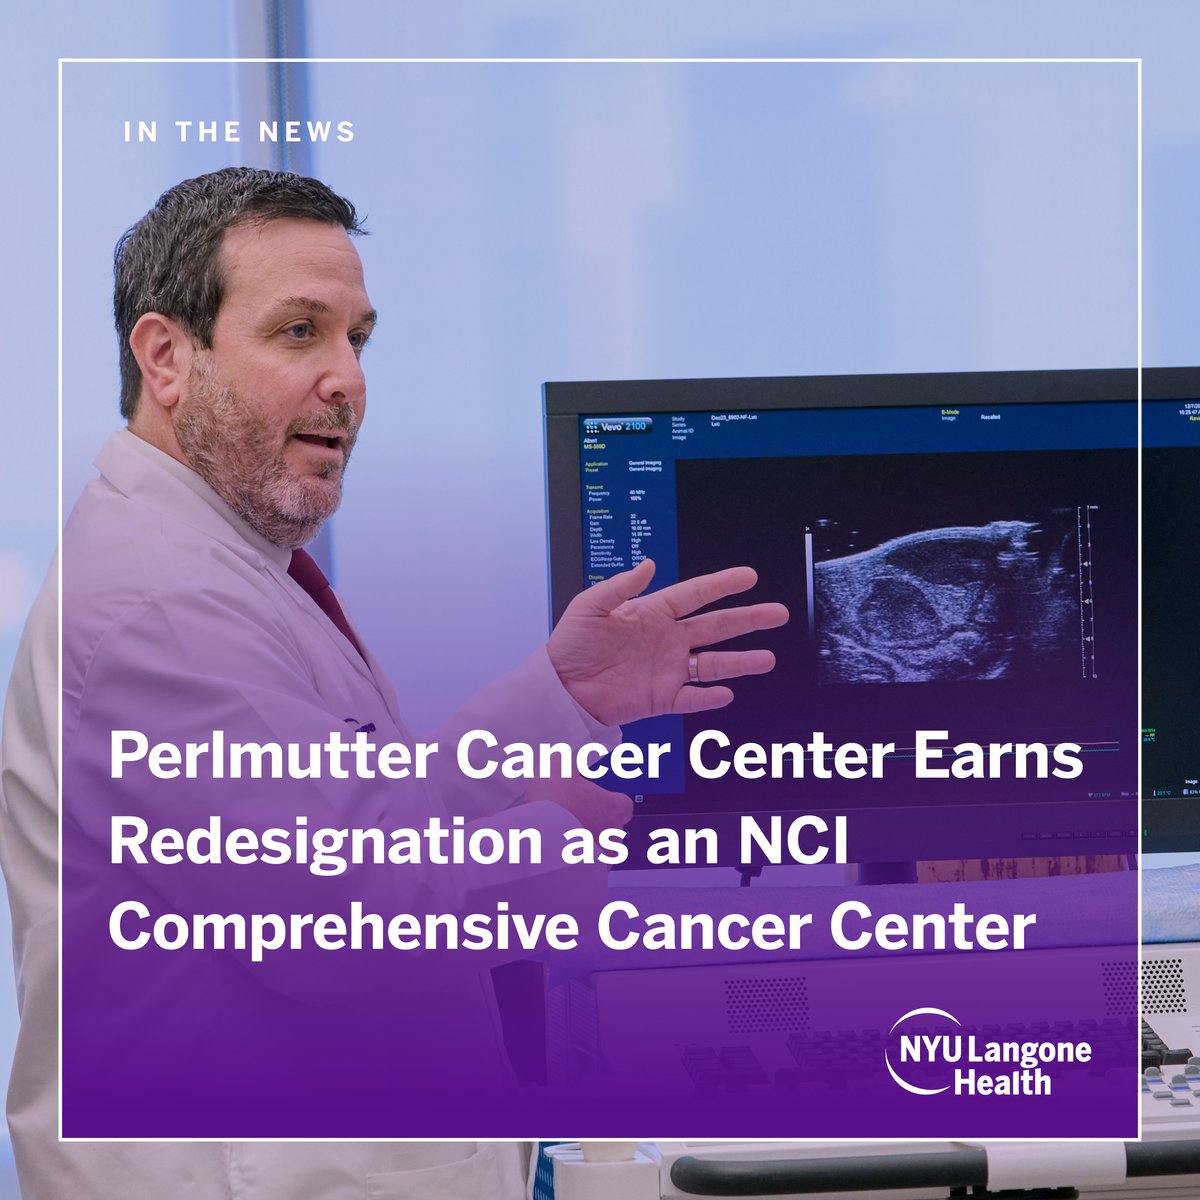 NYU Langone’s Perlmutter Cancer Center has once again been designated as a Comprehensive Cancer Center by @theNCI, further validating its state-of-the-art, research-based approaches to cancer care. Learn more about this elite distinction: bit.ly/3W4Y2SB